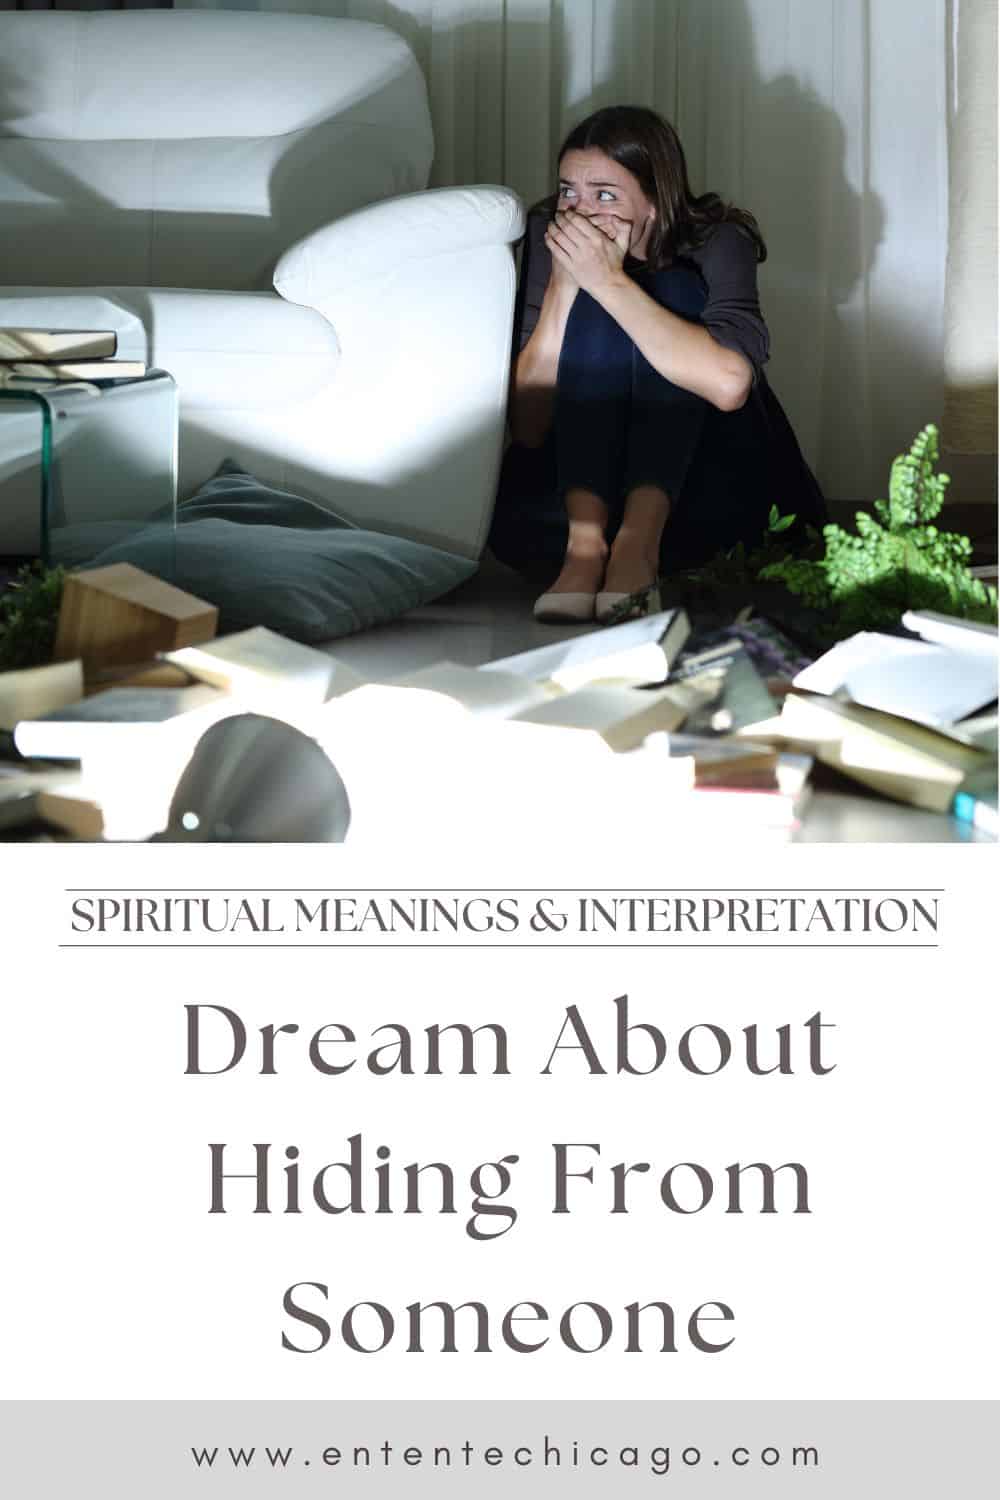 15 Interpretations of Dreams About Hiding From Someone